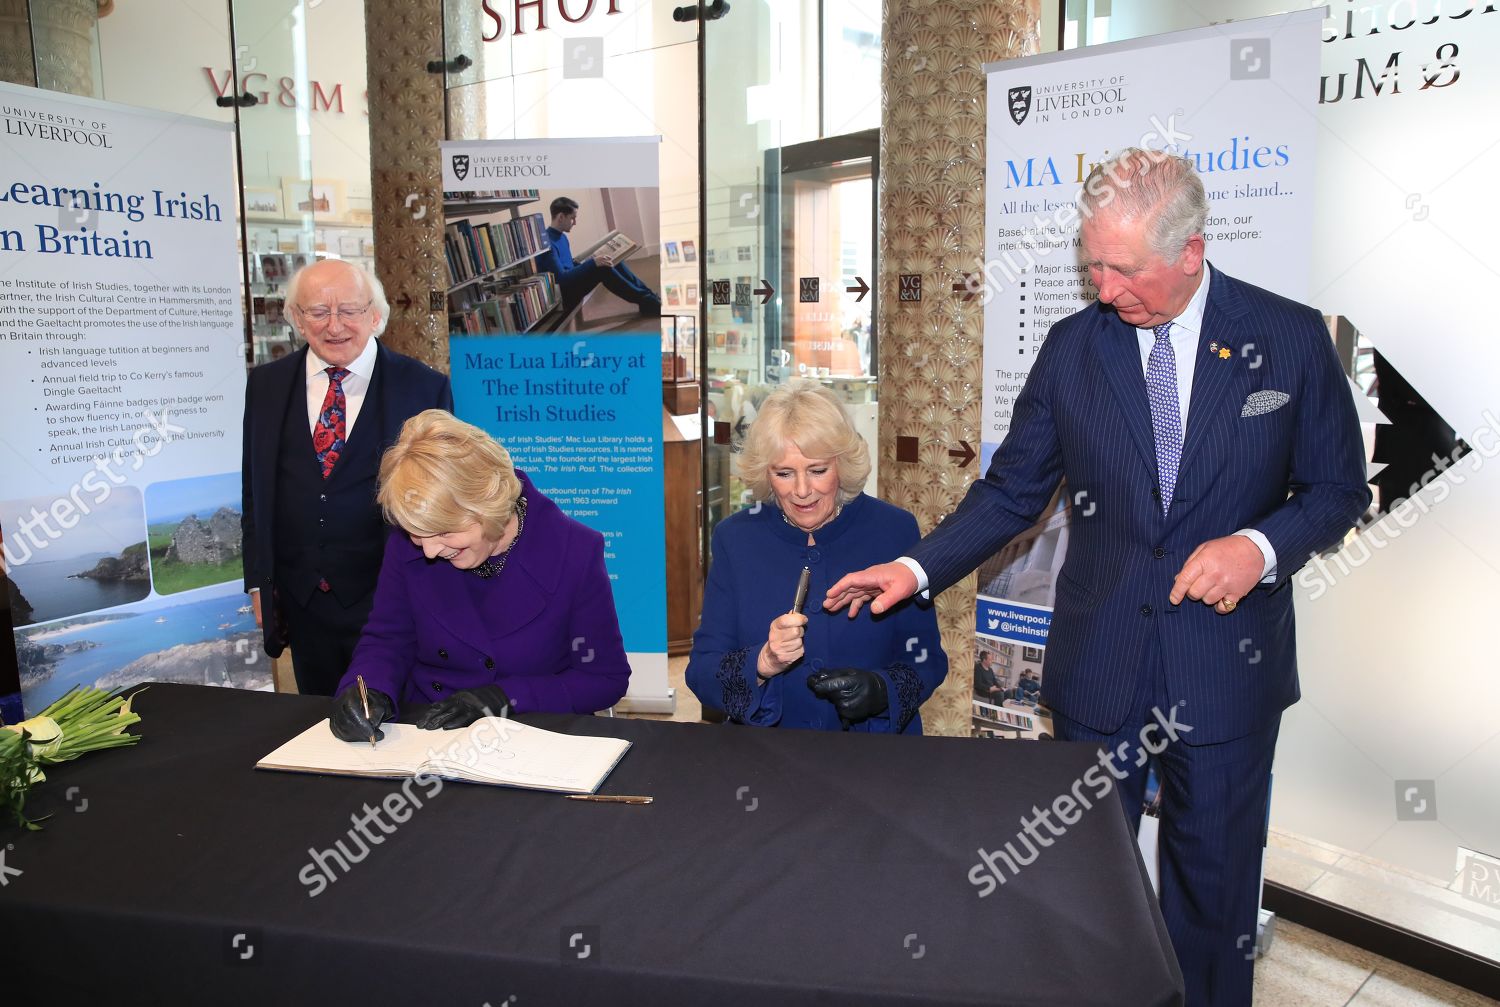 prince-charles-and-duchess-of-cornwall-visit-liverpool-uk-shutterstock-editorial-10102607c.jpg